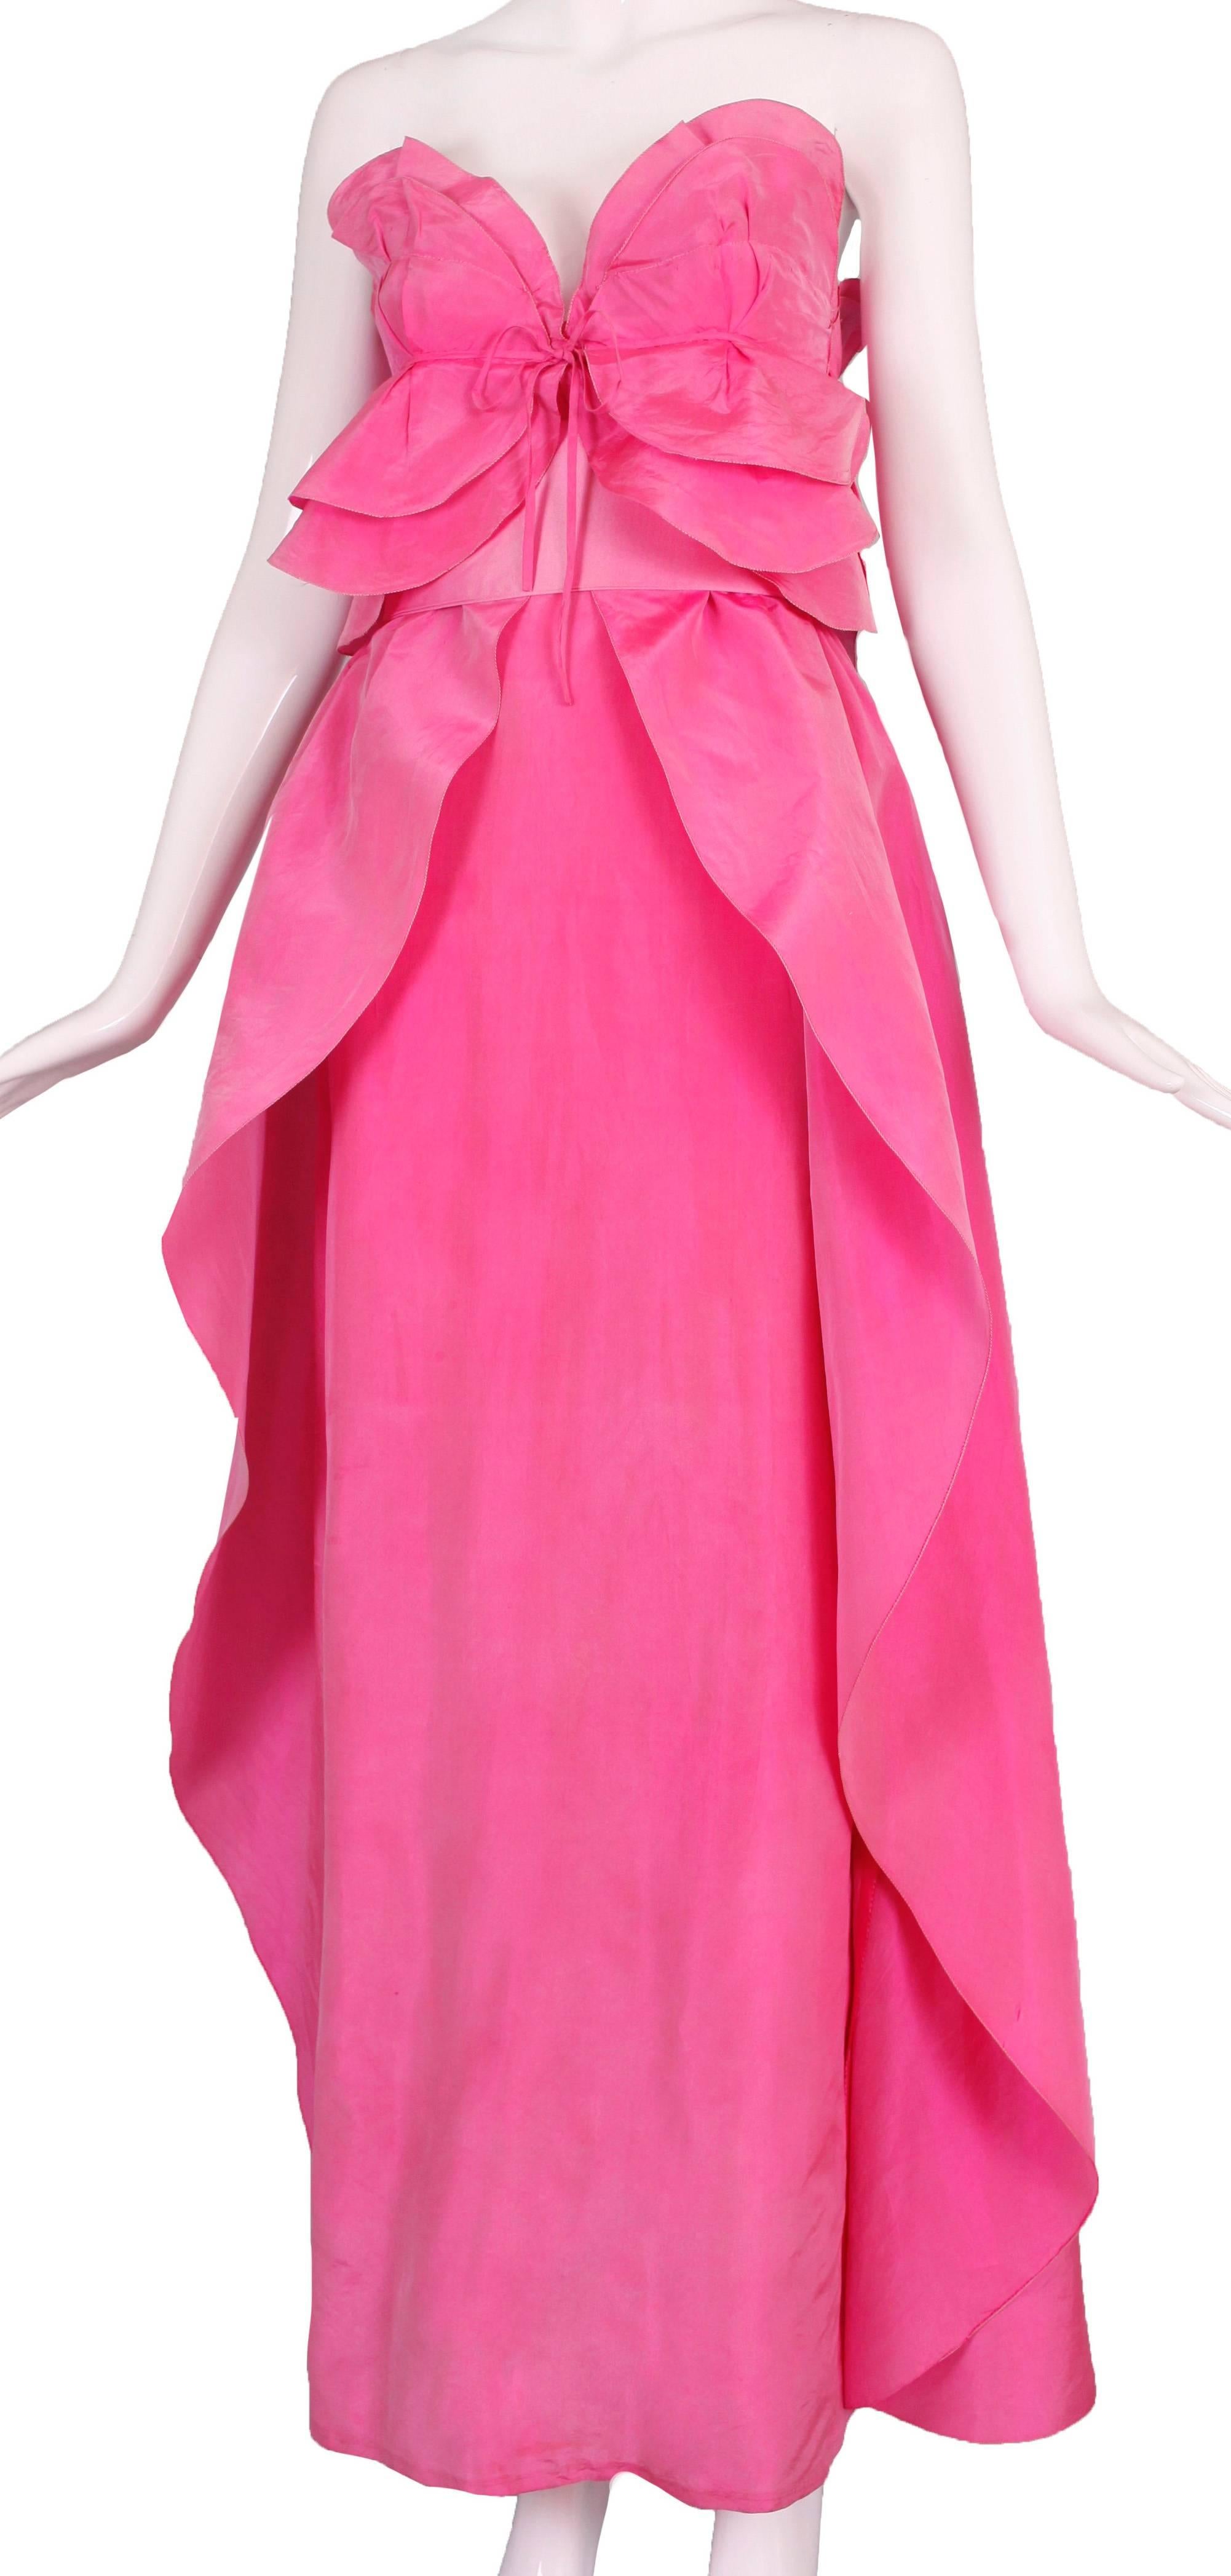 A Loris Azzaro pink silk taffeta strapless gown with boned bodice and multiple tiers embellishing the neckline and two-tiered skirt. In good vintage condition - sold as is, which is reflected in the price. Please ask any and all questions related to